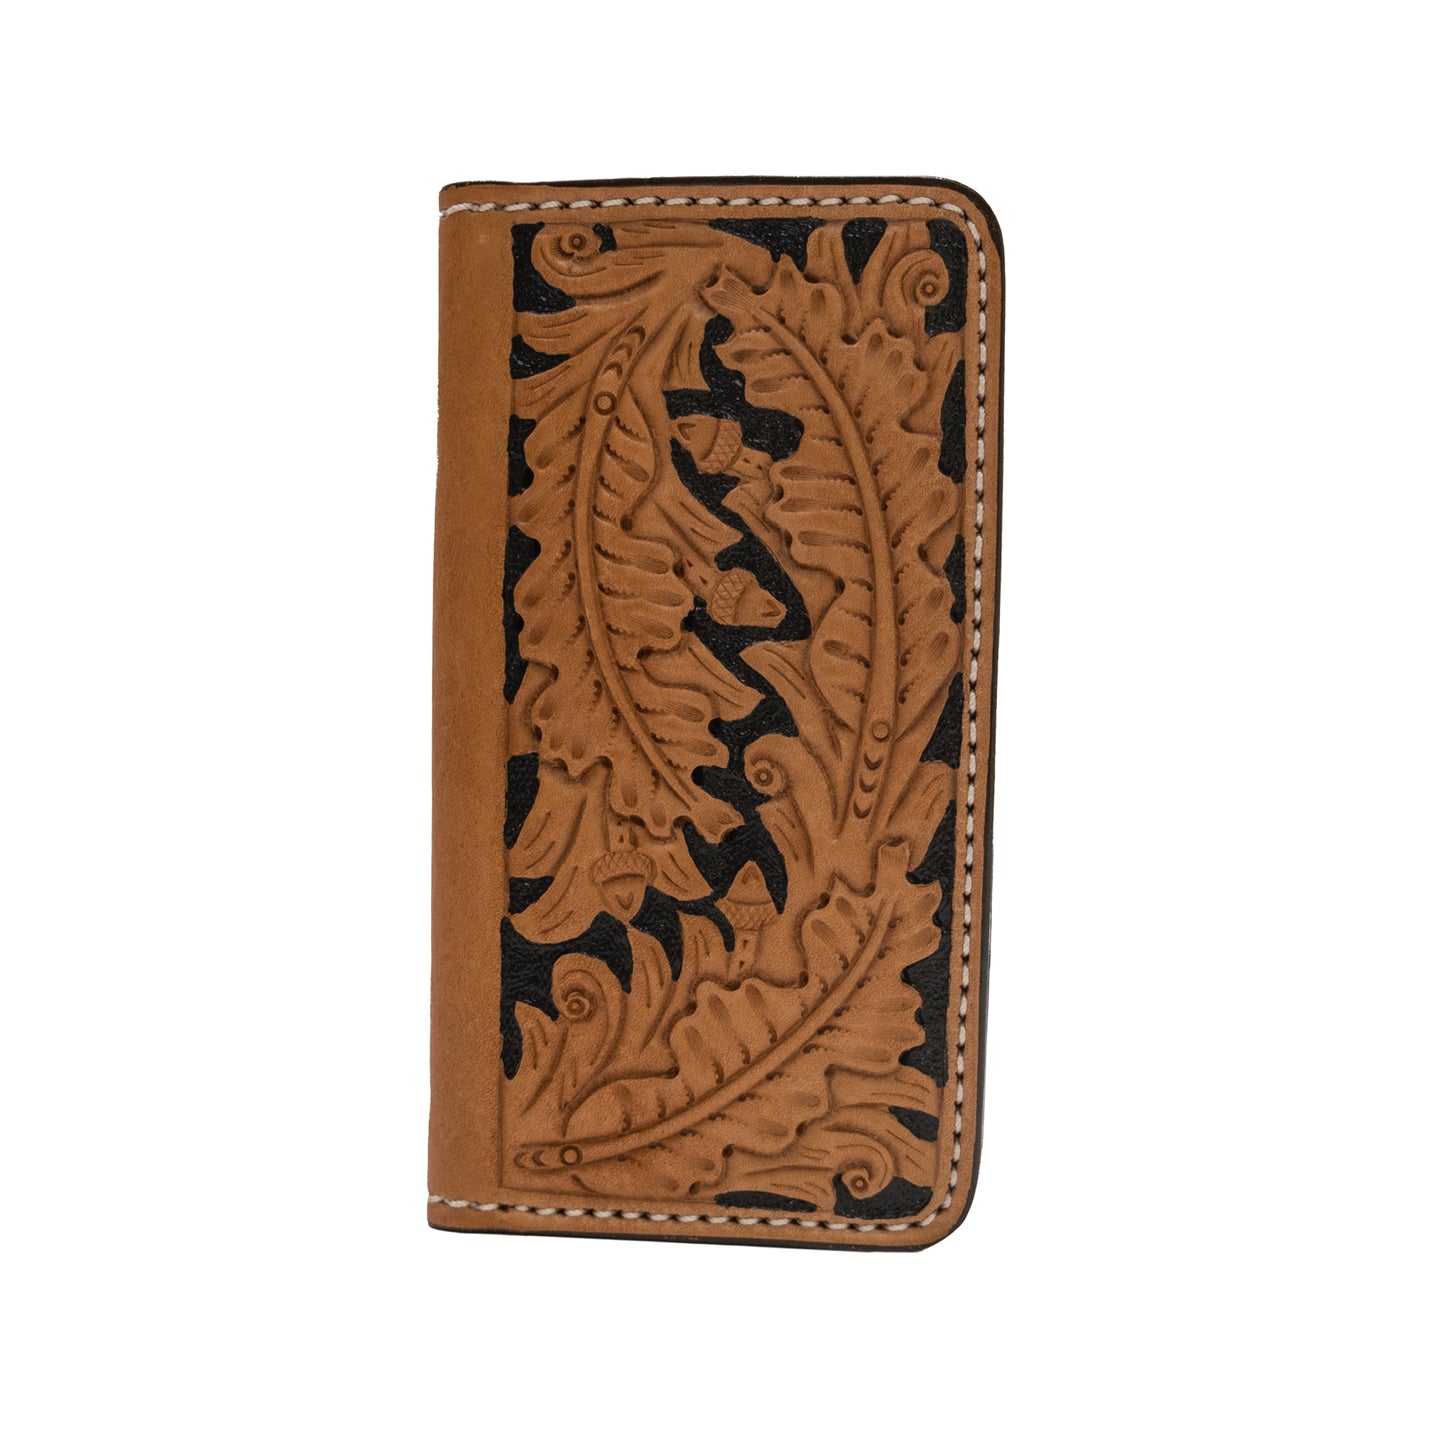 Tall wallet golden leather poco oak tooling with background paint